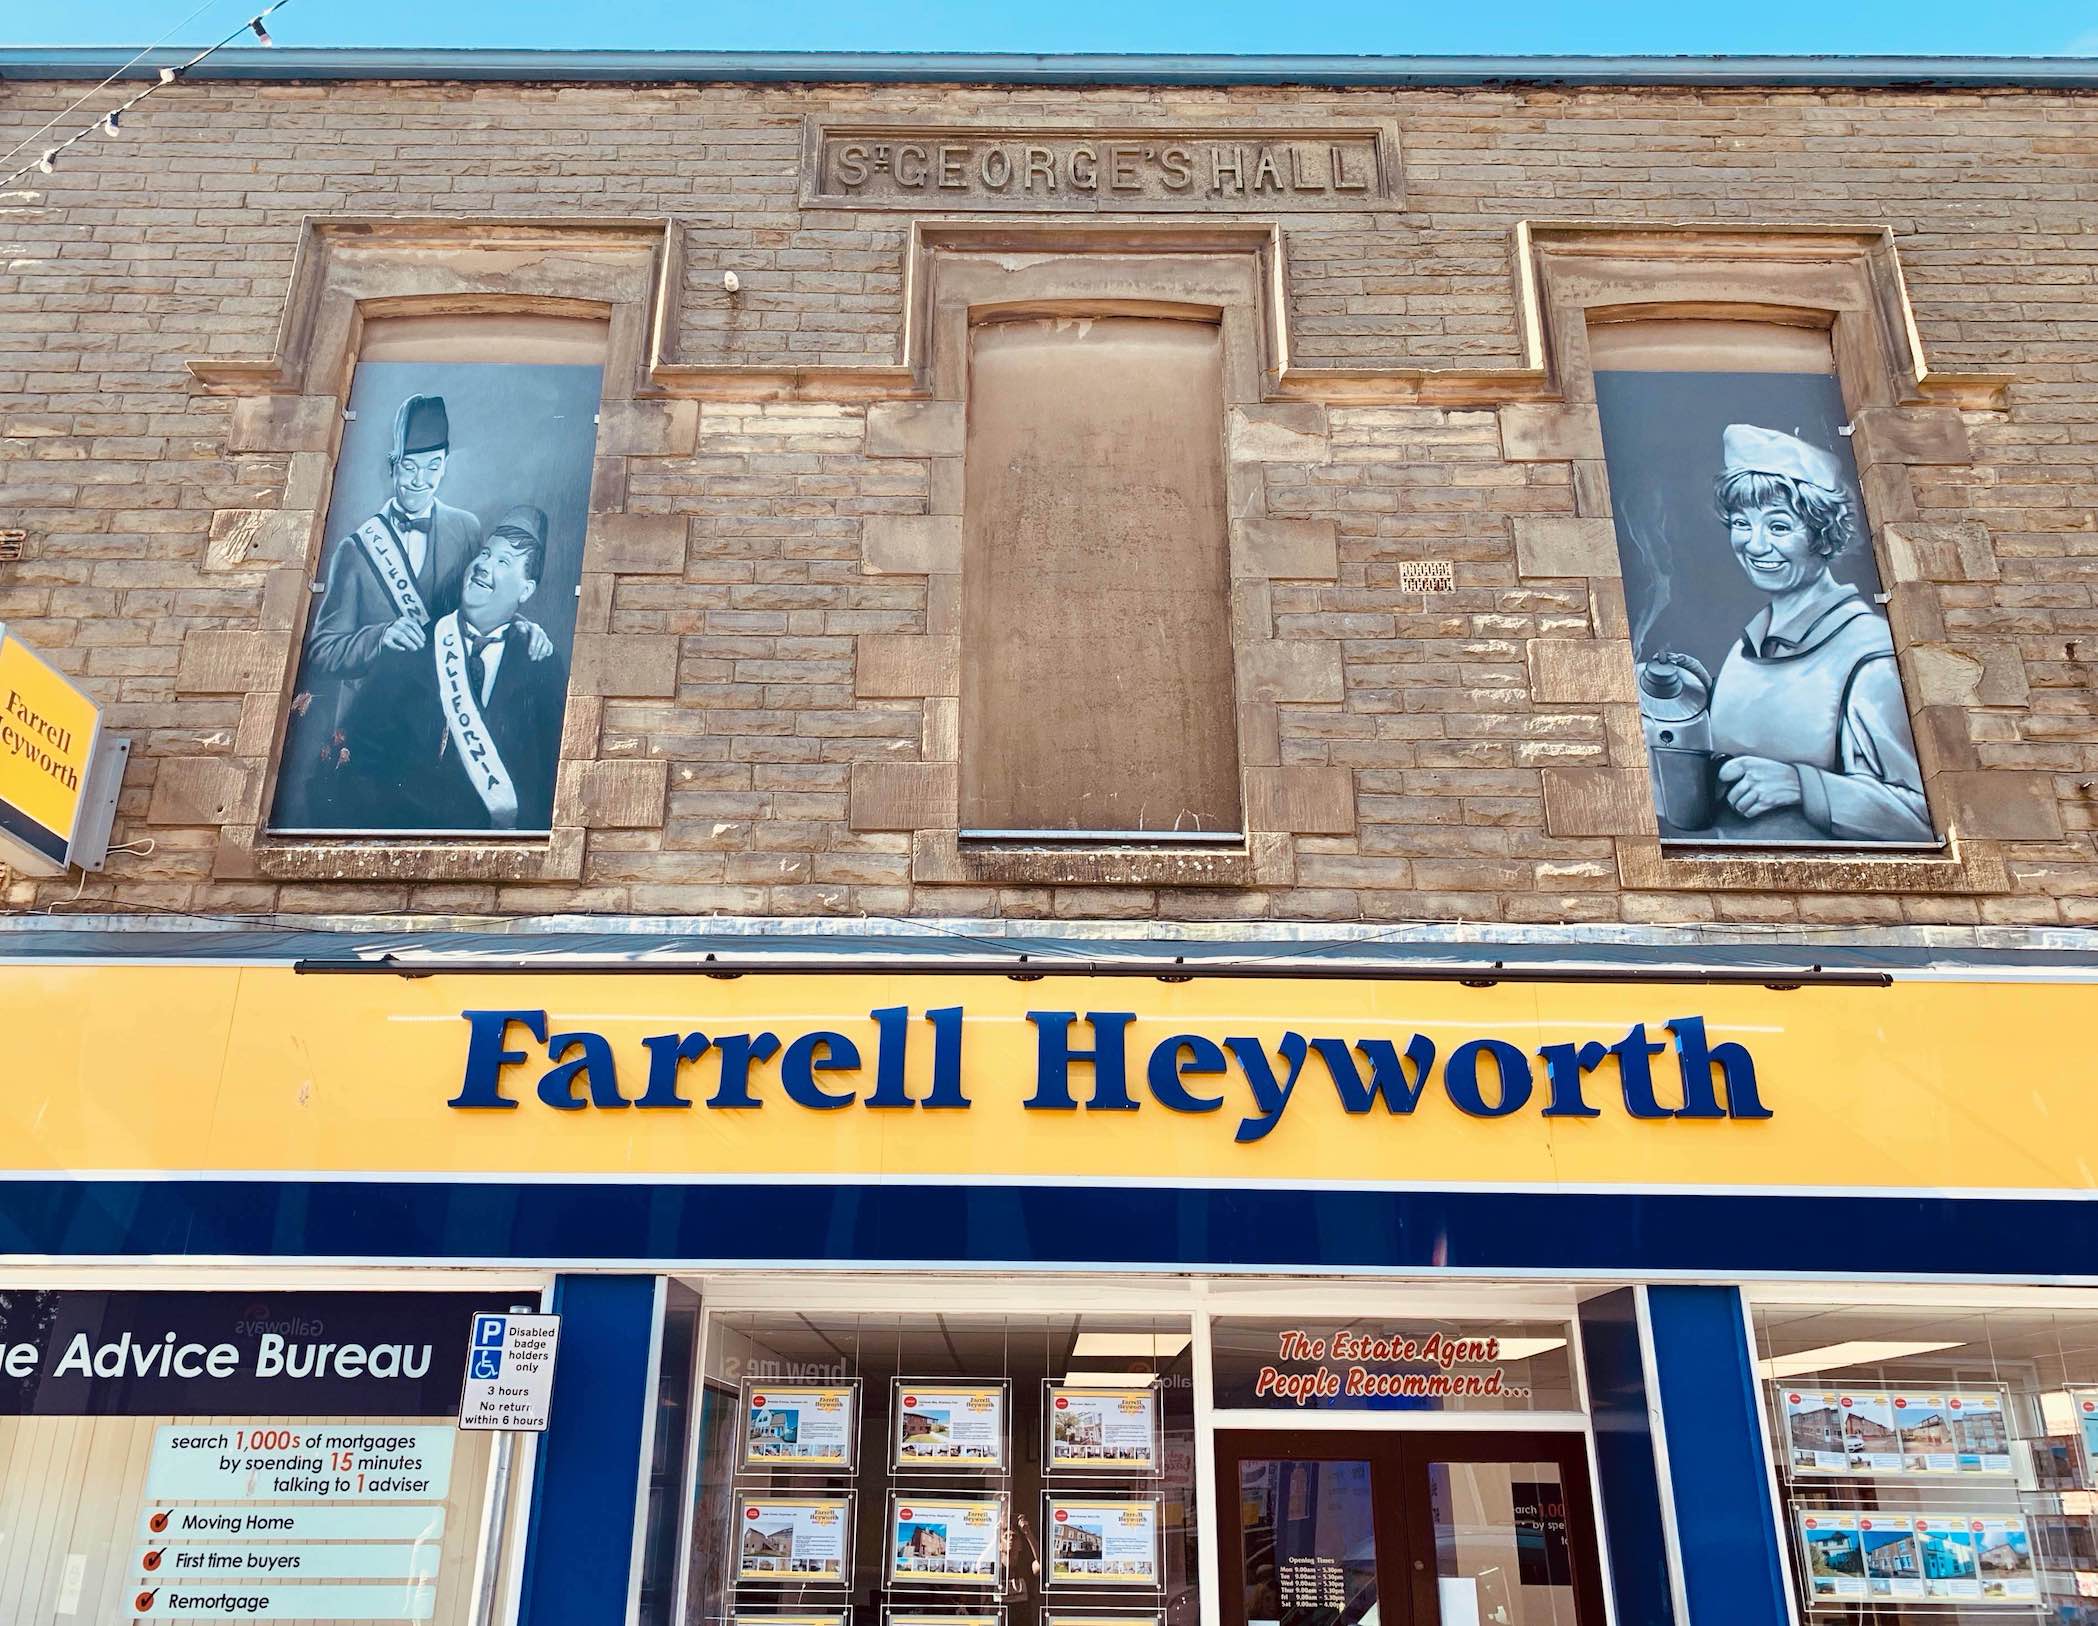 Victoria Wood and Laurel and Hardy murals in Morecambe